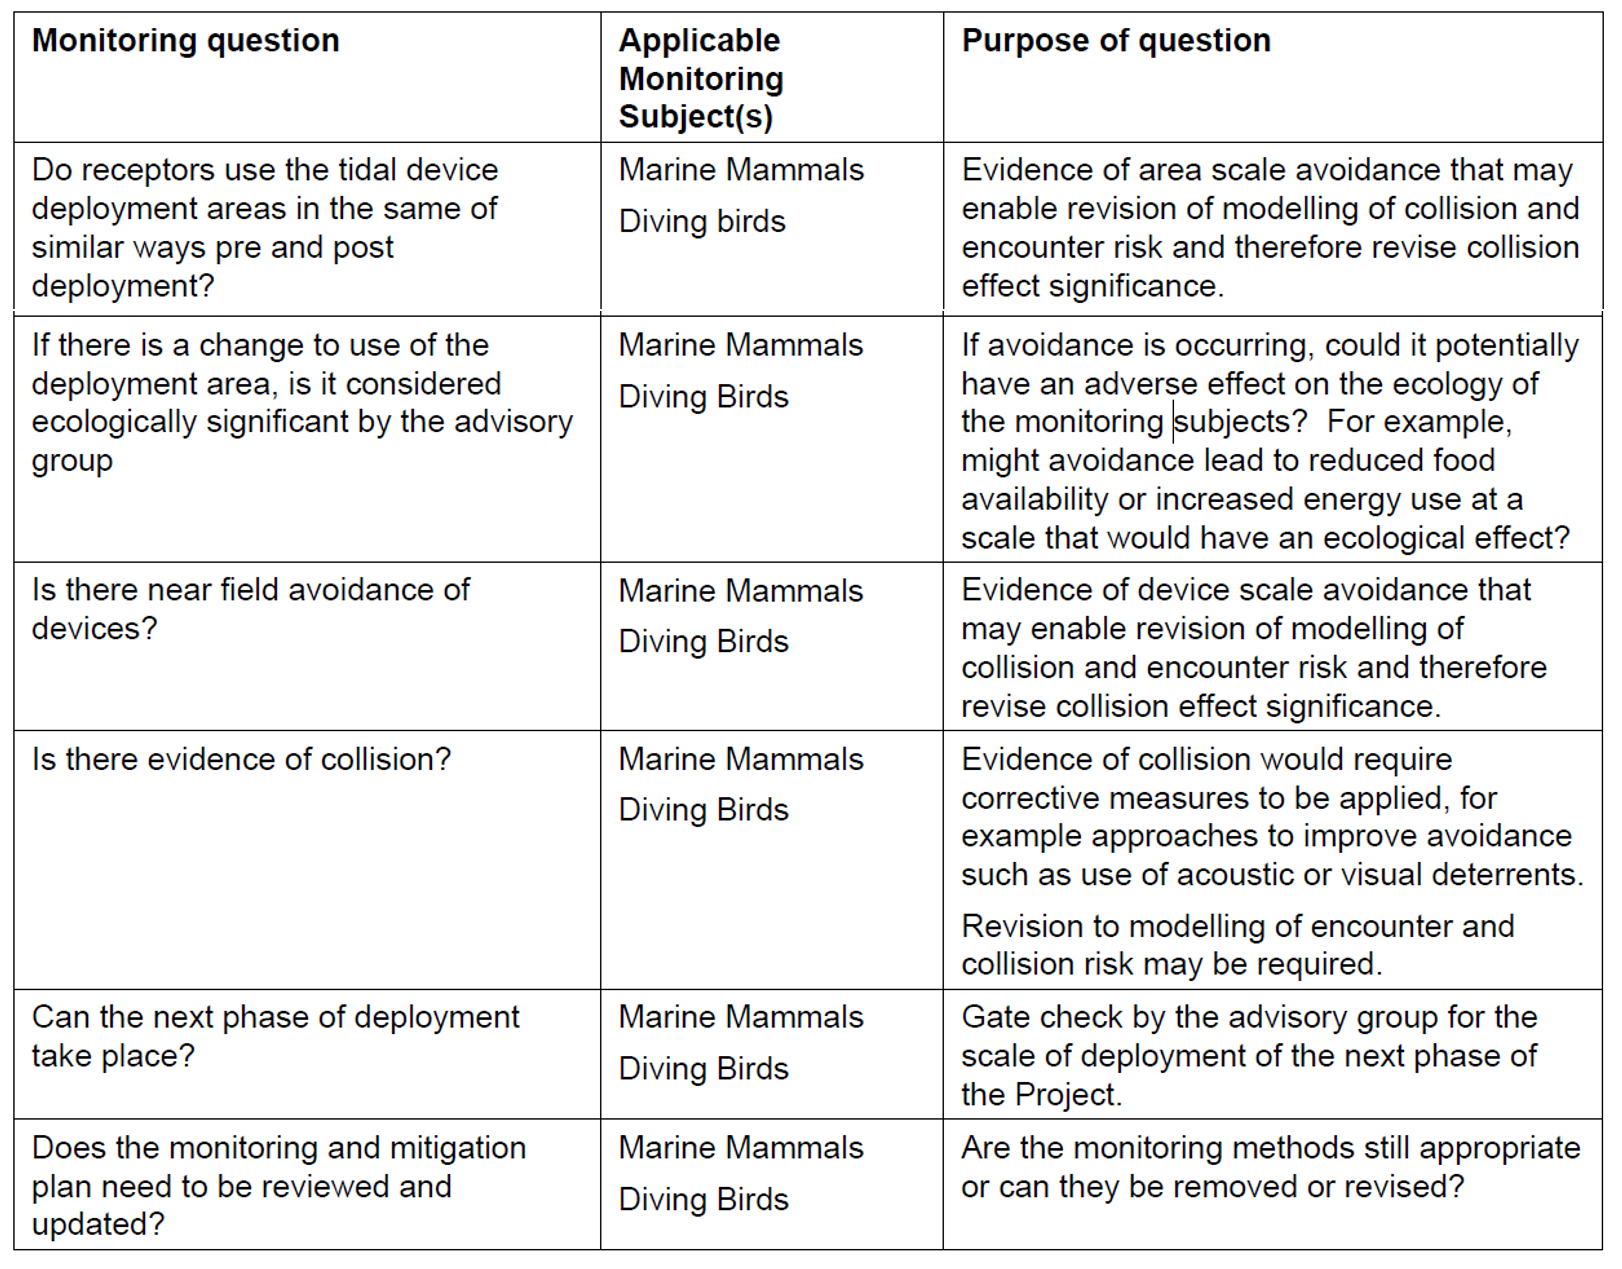 Table of monitoring questions 